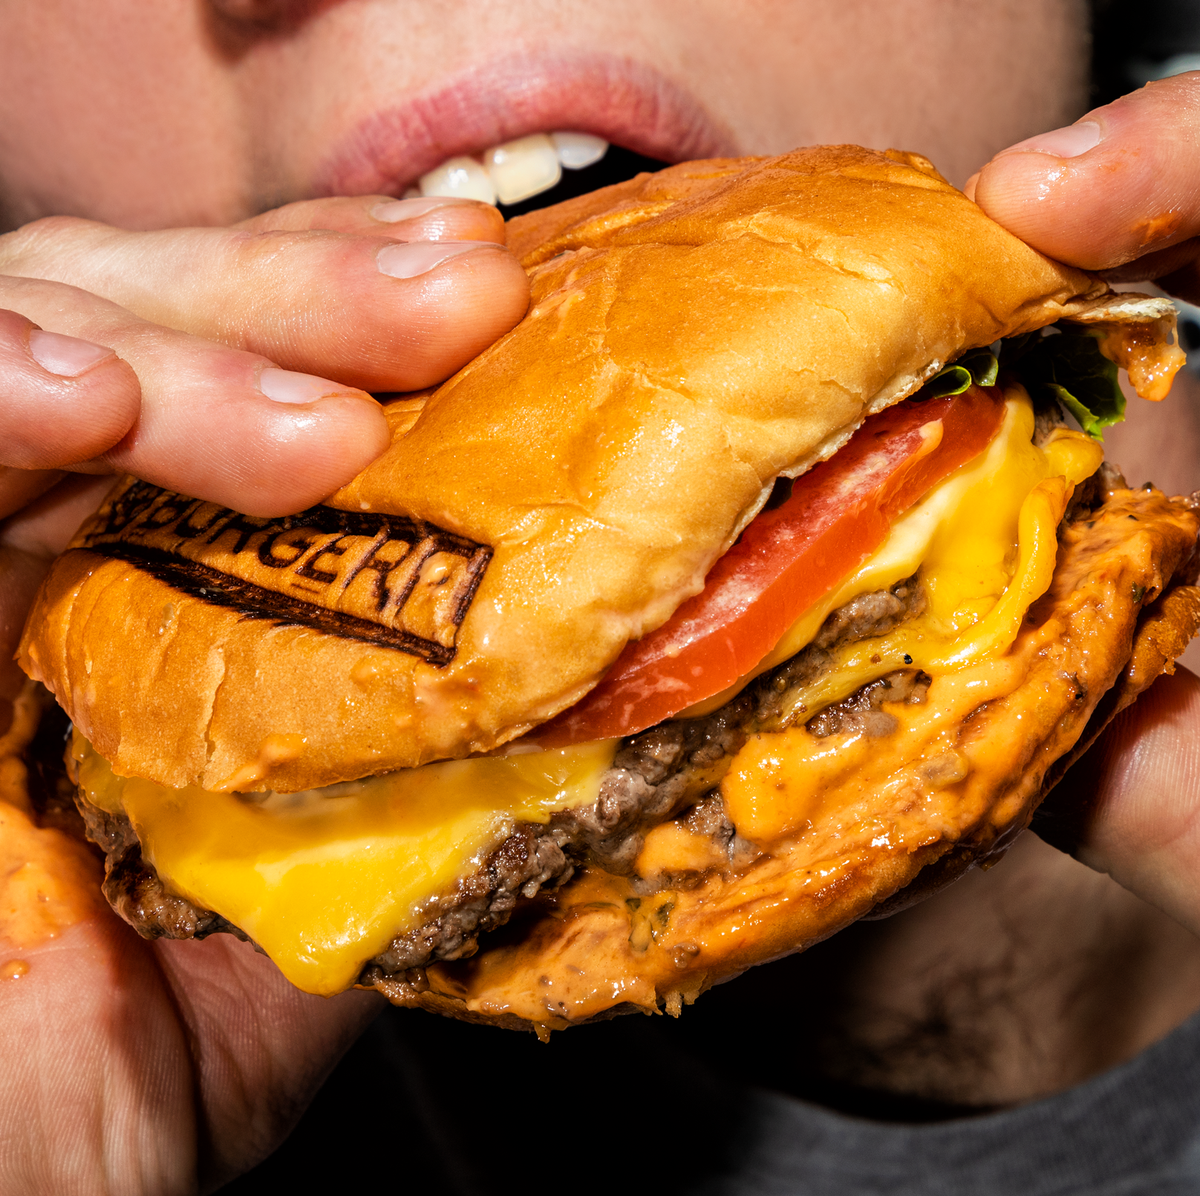 Chains Burger Kill Healthier Might Eventually Why McDonald\'s